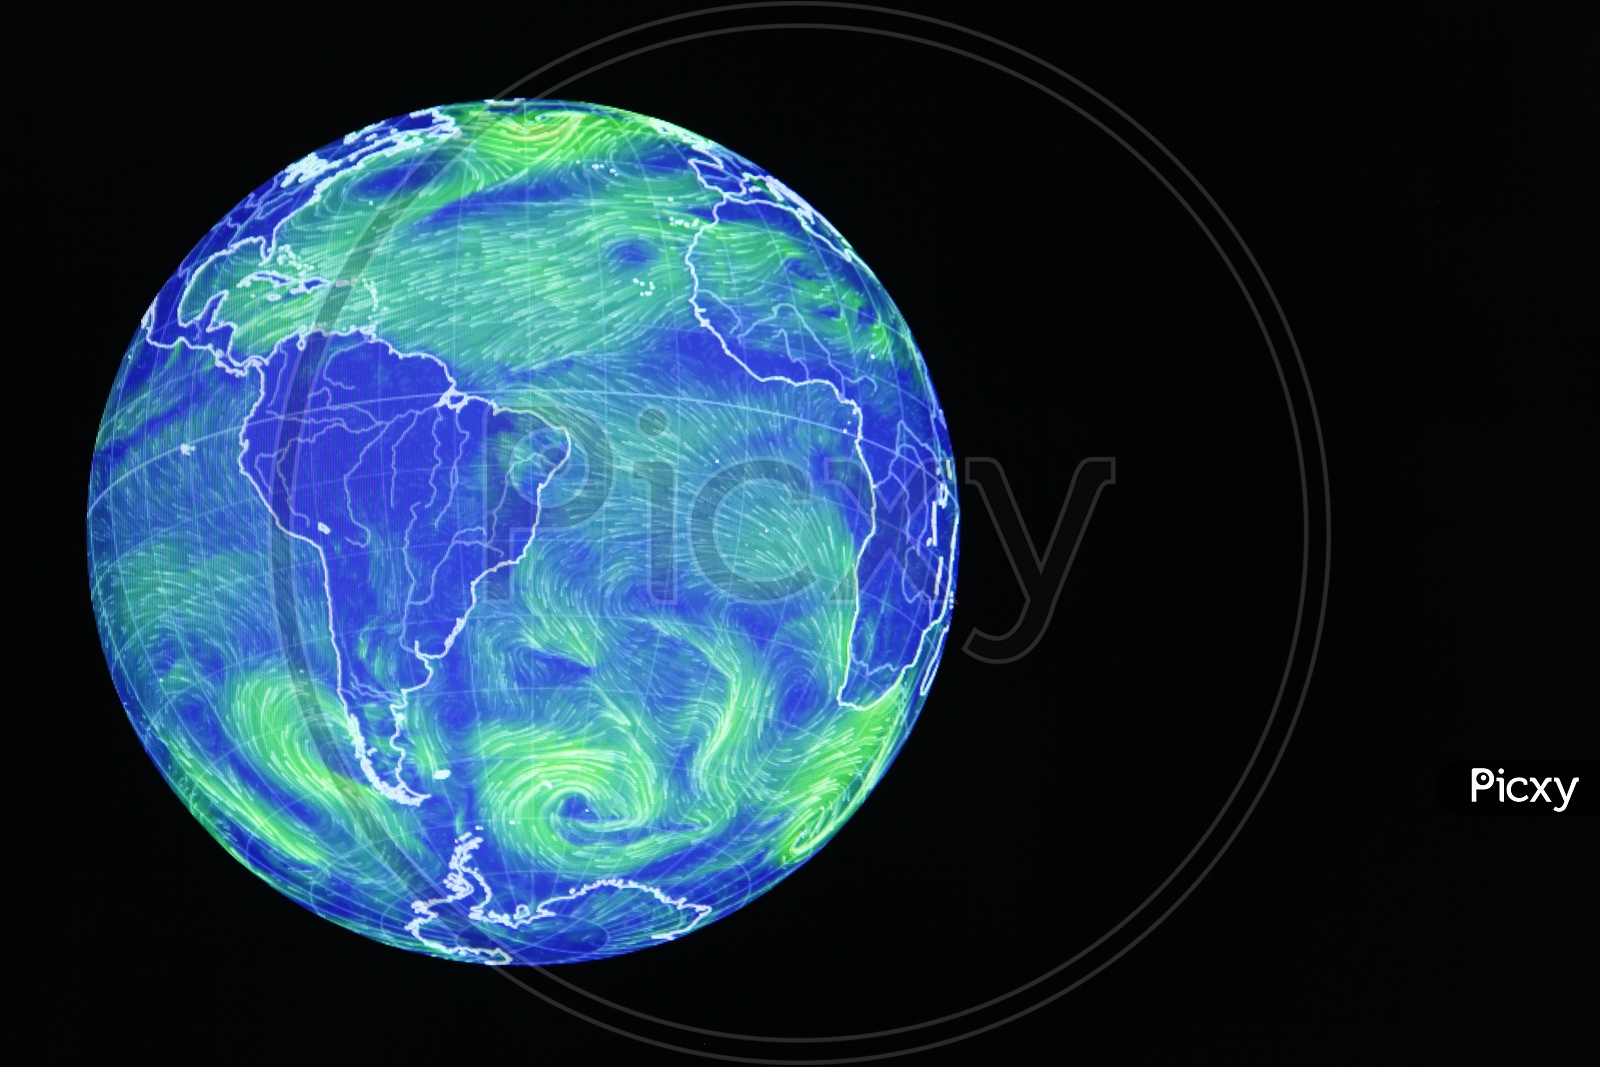 A graphical weather representation of the Earth globe in blue and green patterns